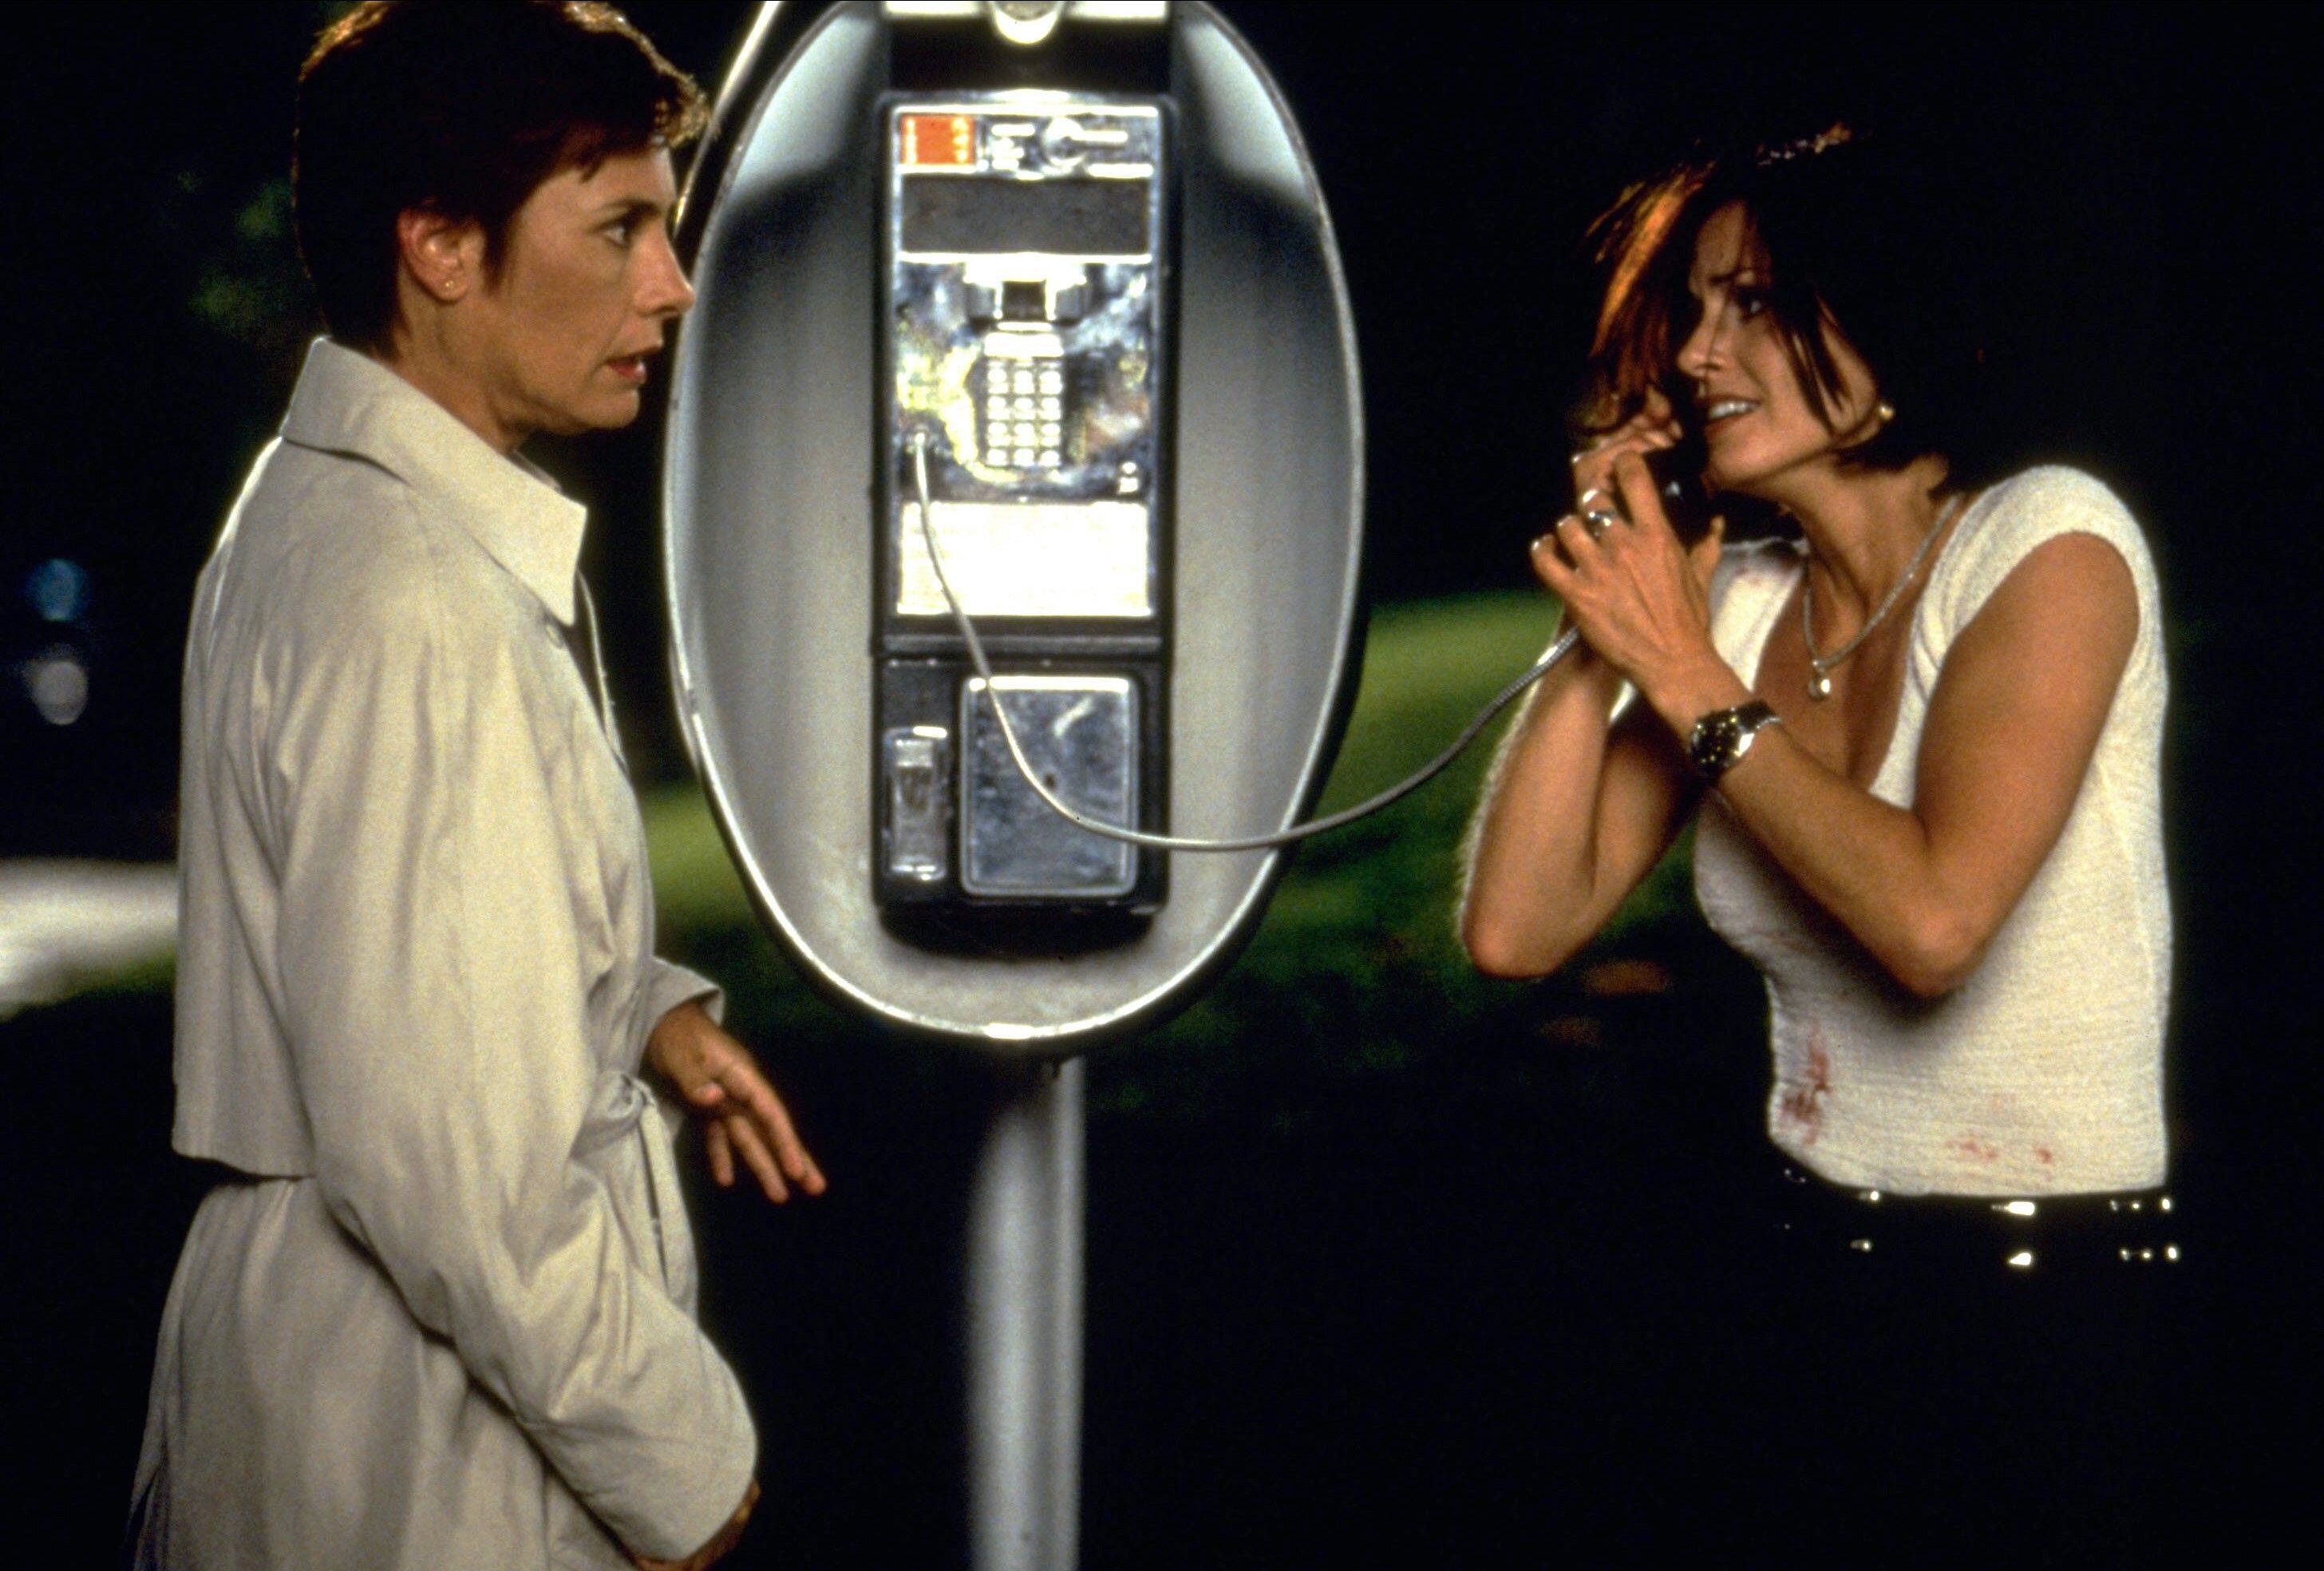 A woman in a trench coat surprises a another woman in a white shirt at a pay phone